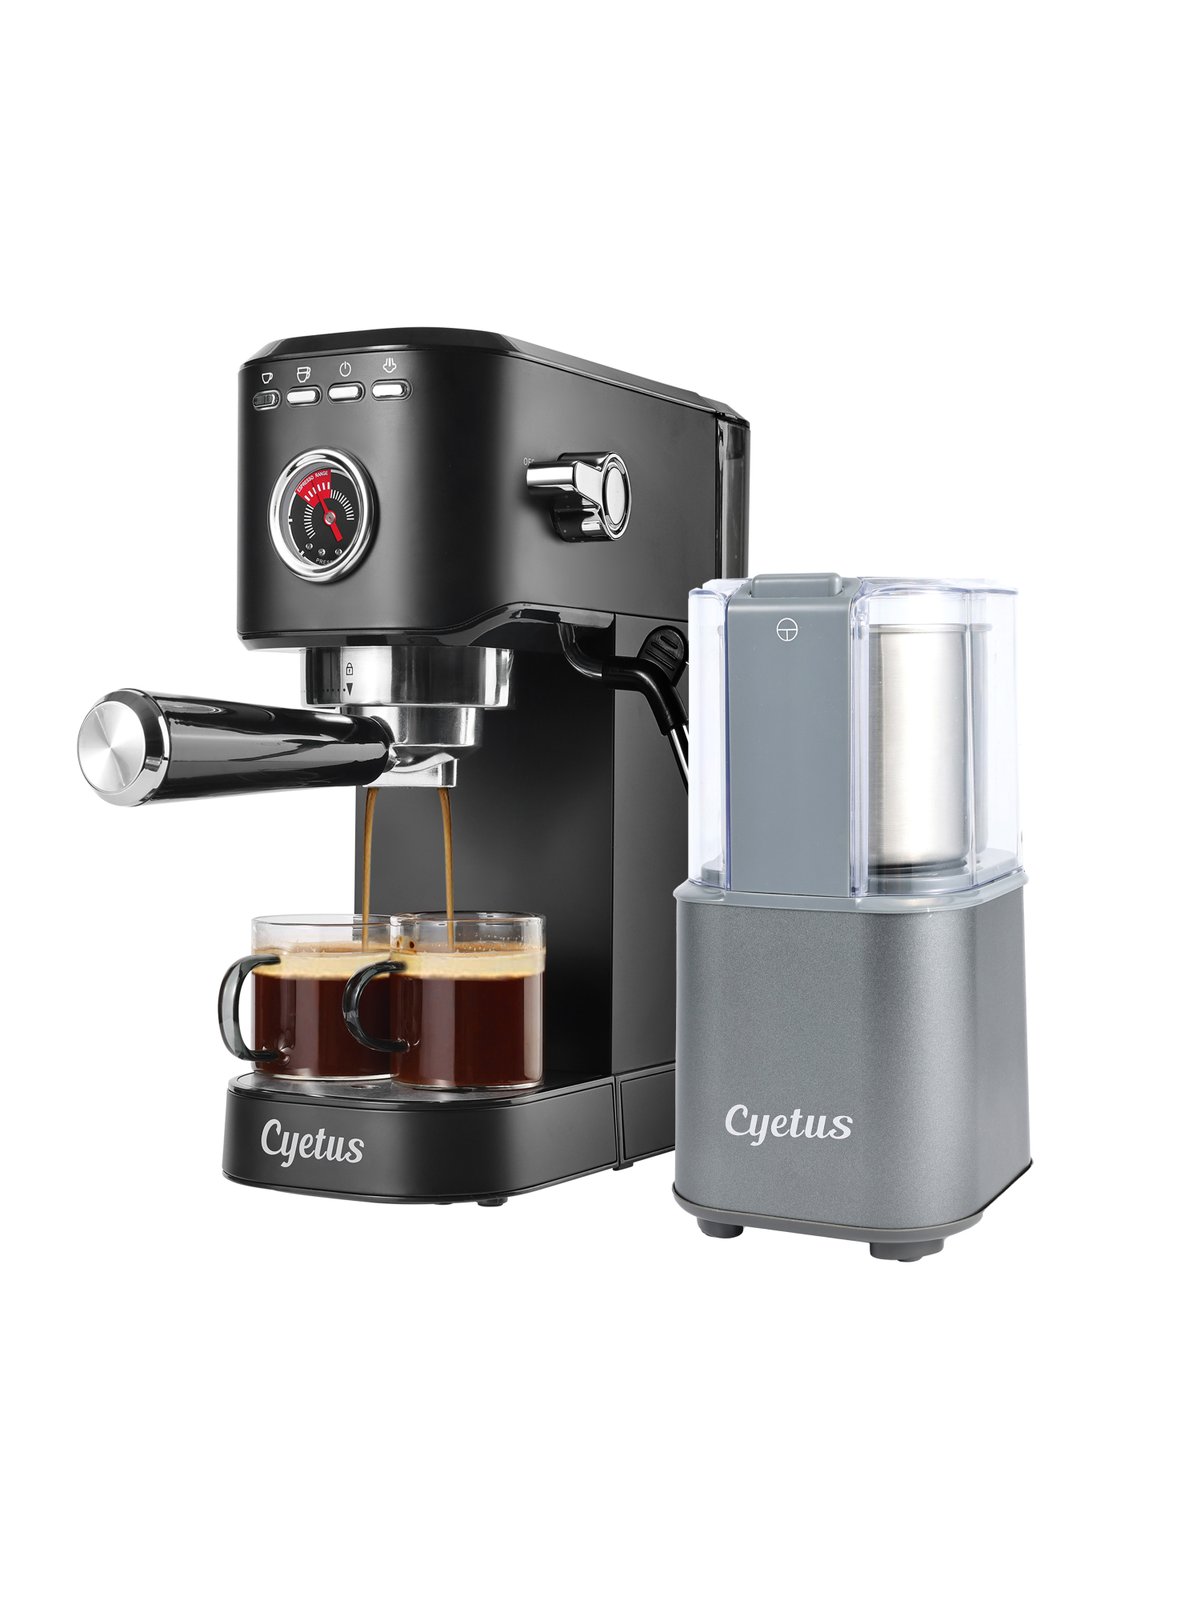 https://images.verishop.com/cyetus-black-espresso-machine-for-at-home-use-with-milk-steam-frother-wand-and-electric-coffee-bean-grinder-with-removable-stainless-steel-bowl/M00679283562651-3442552323?auto=format&cs=strip&fit=max&w=1200